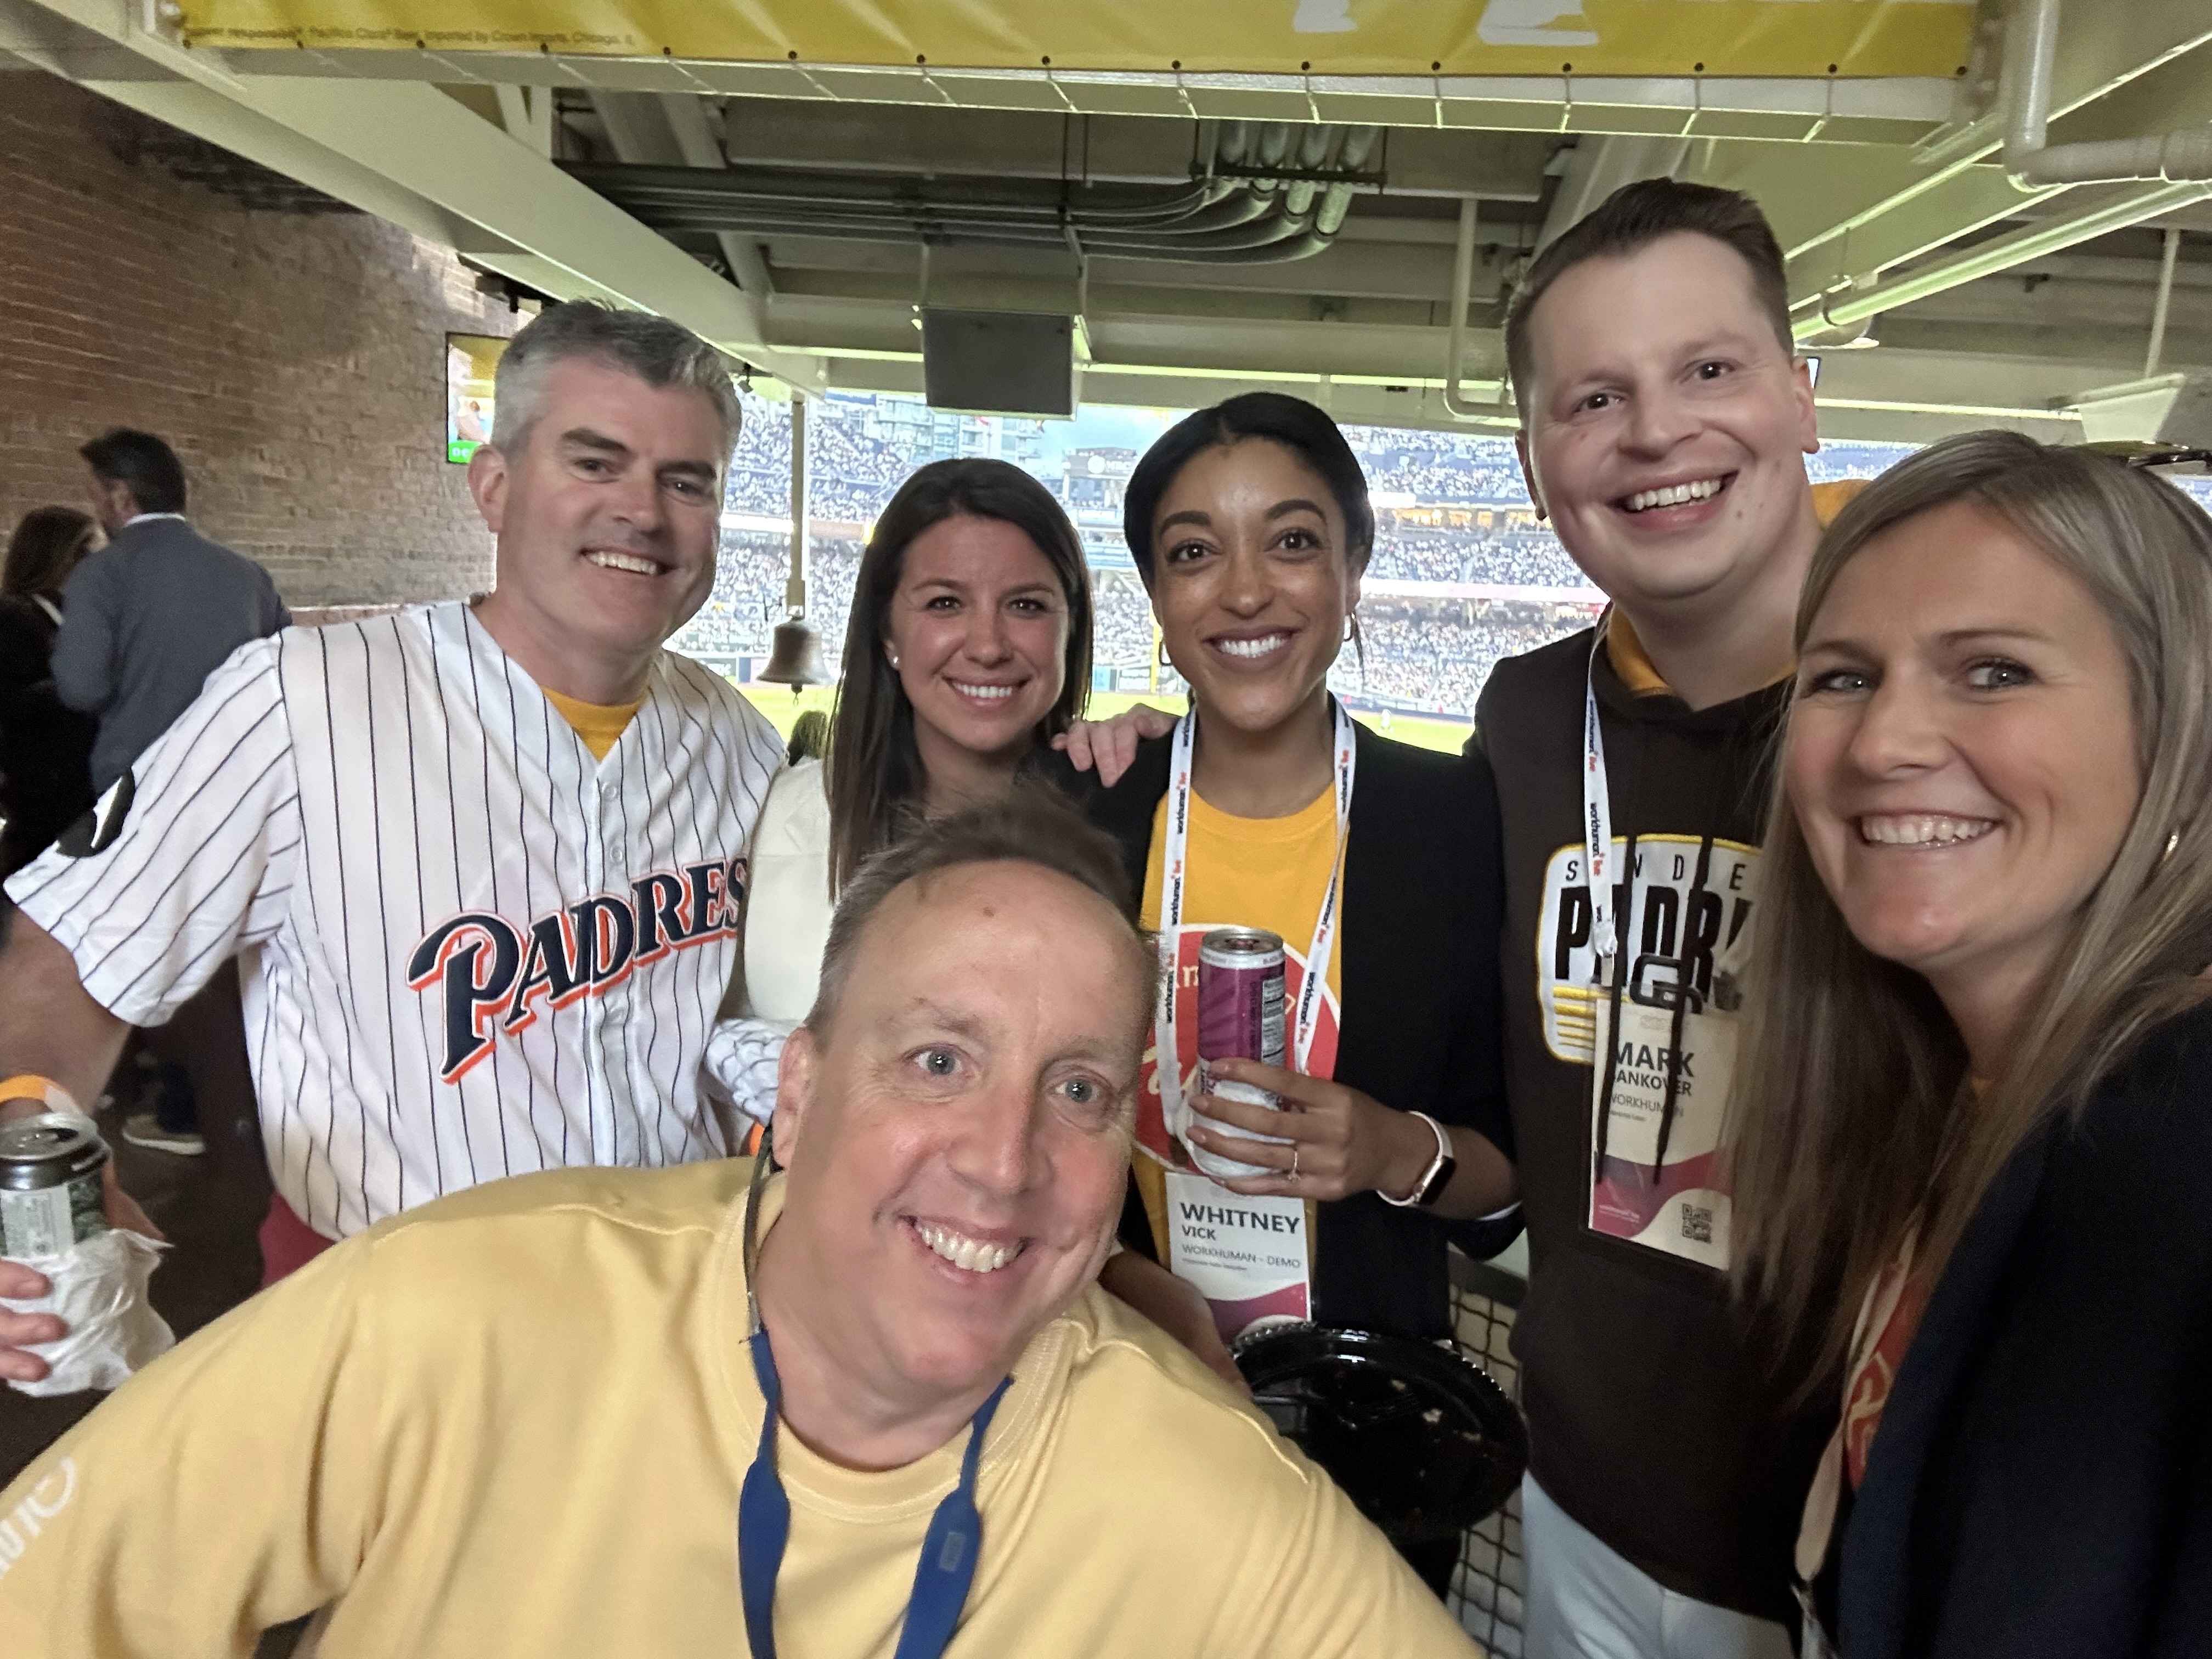 Workhuman employees pose for a group selfie at a Padres baseball game.